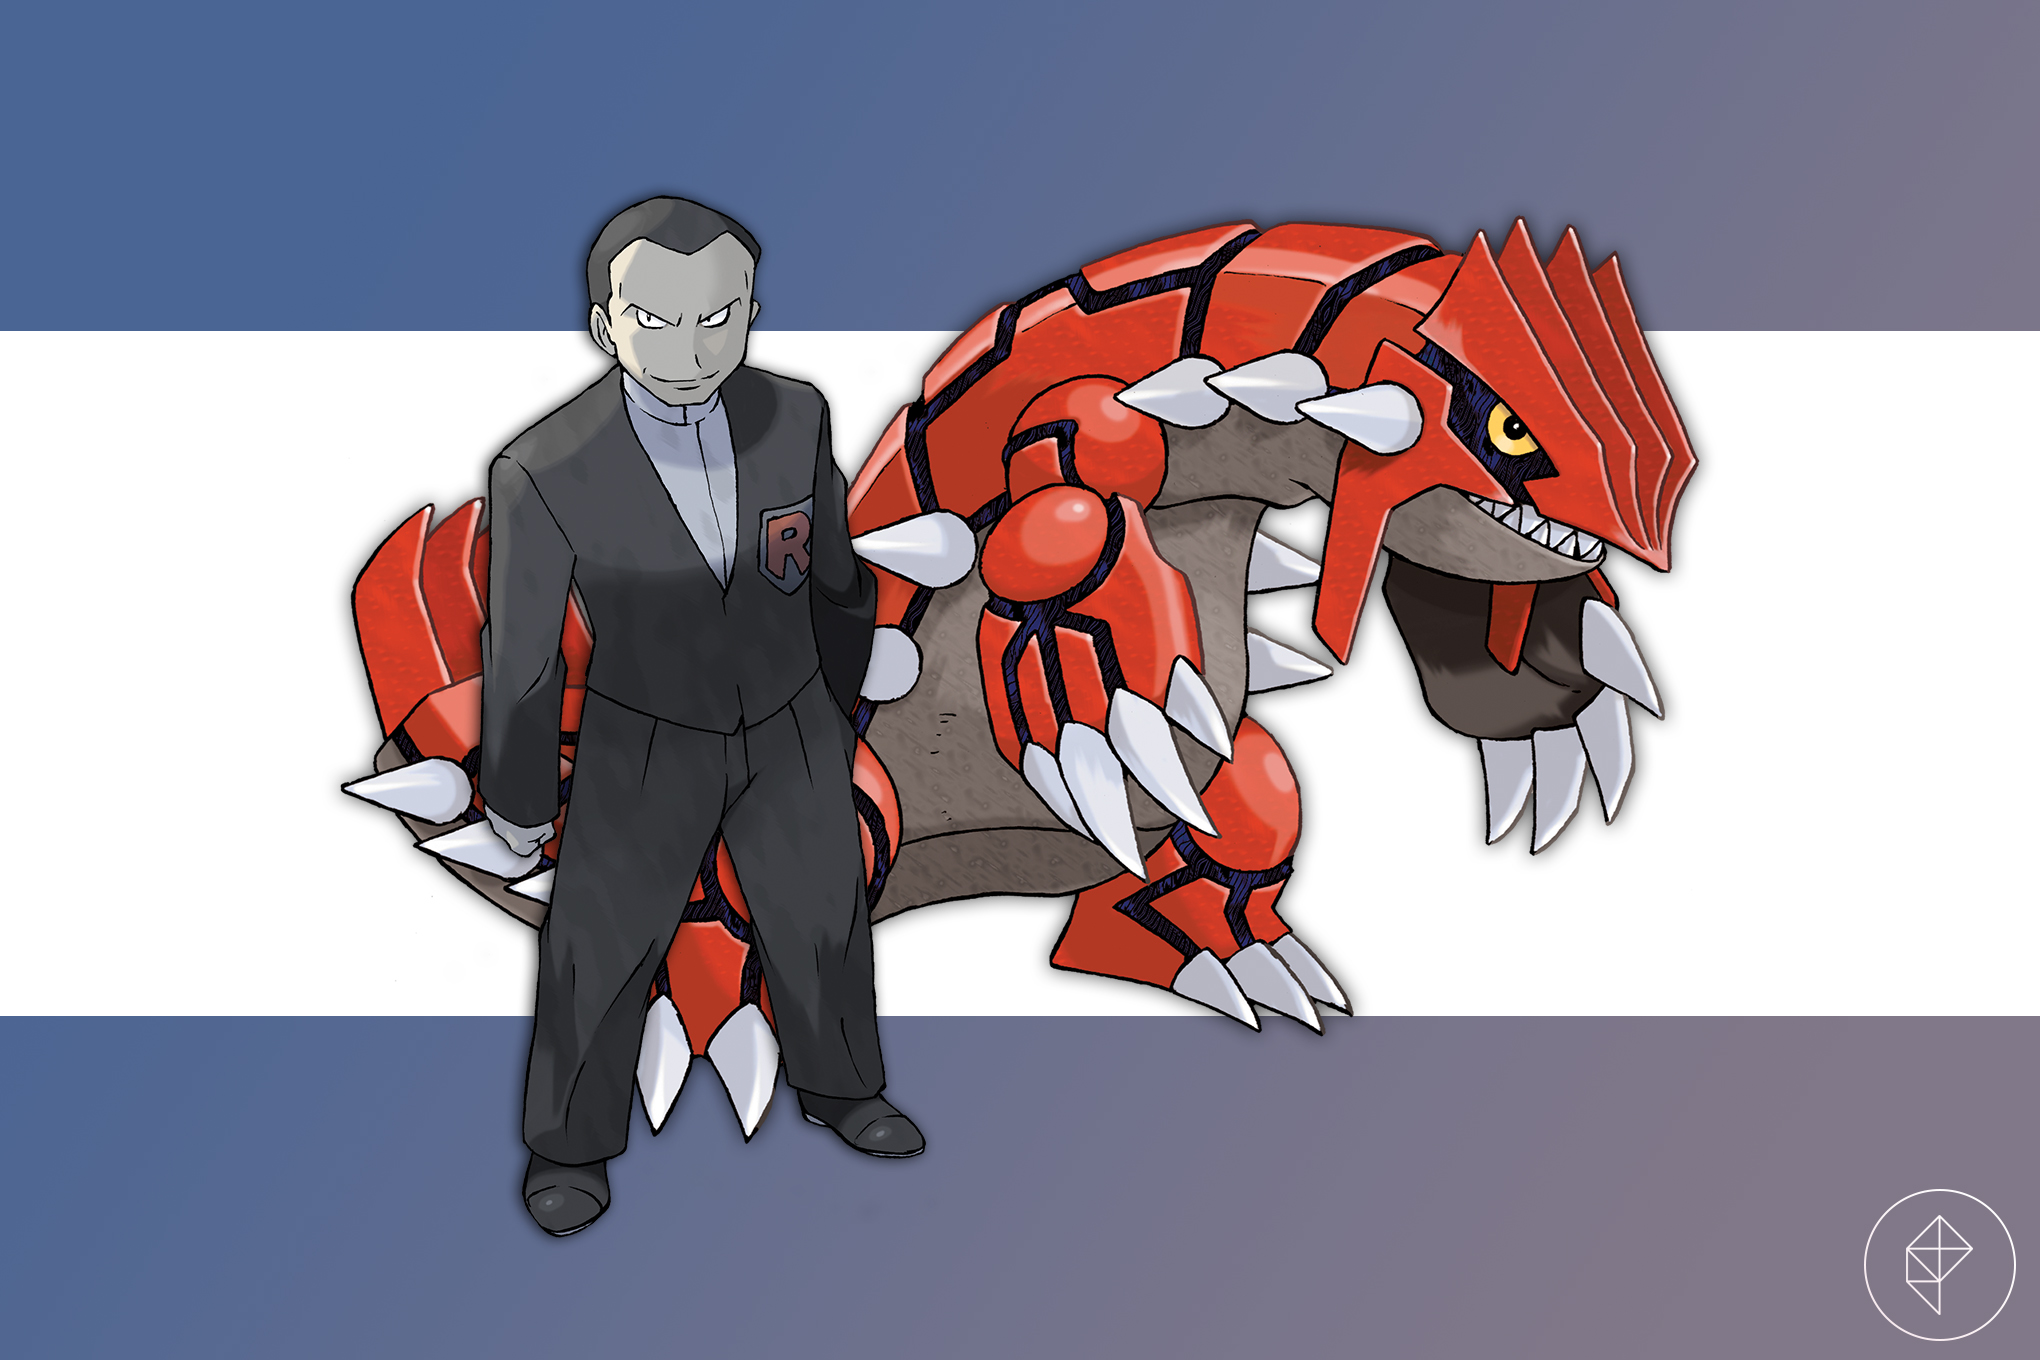 Giovanni poses with Groudon